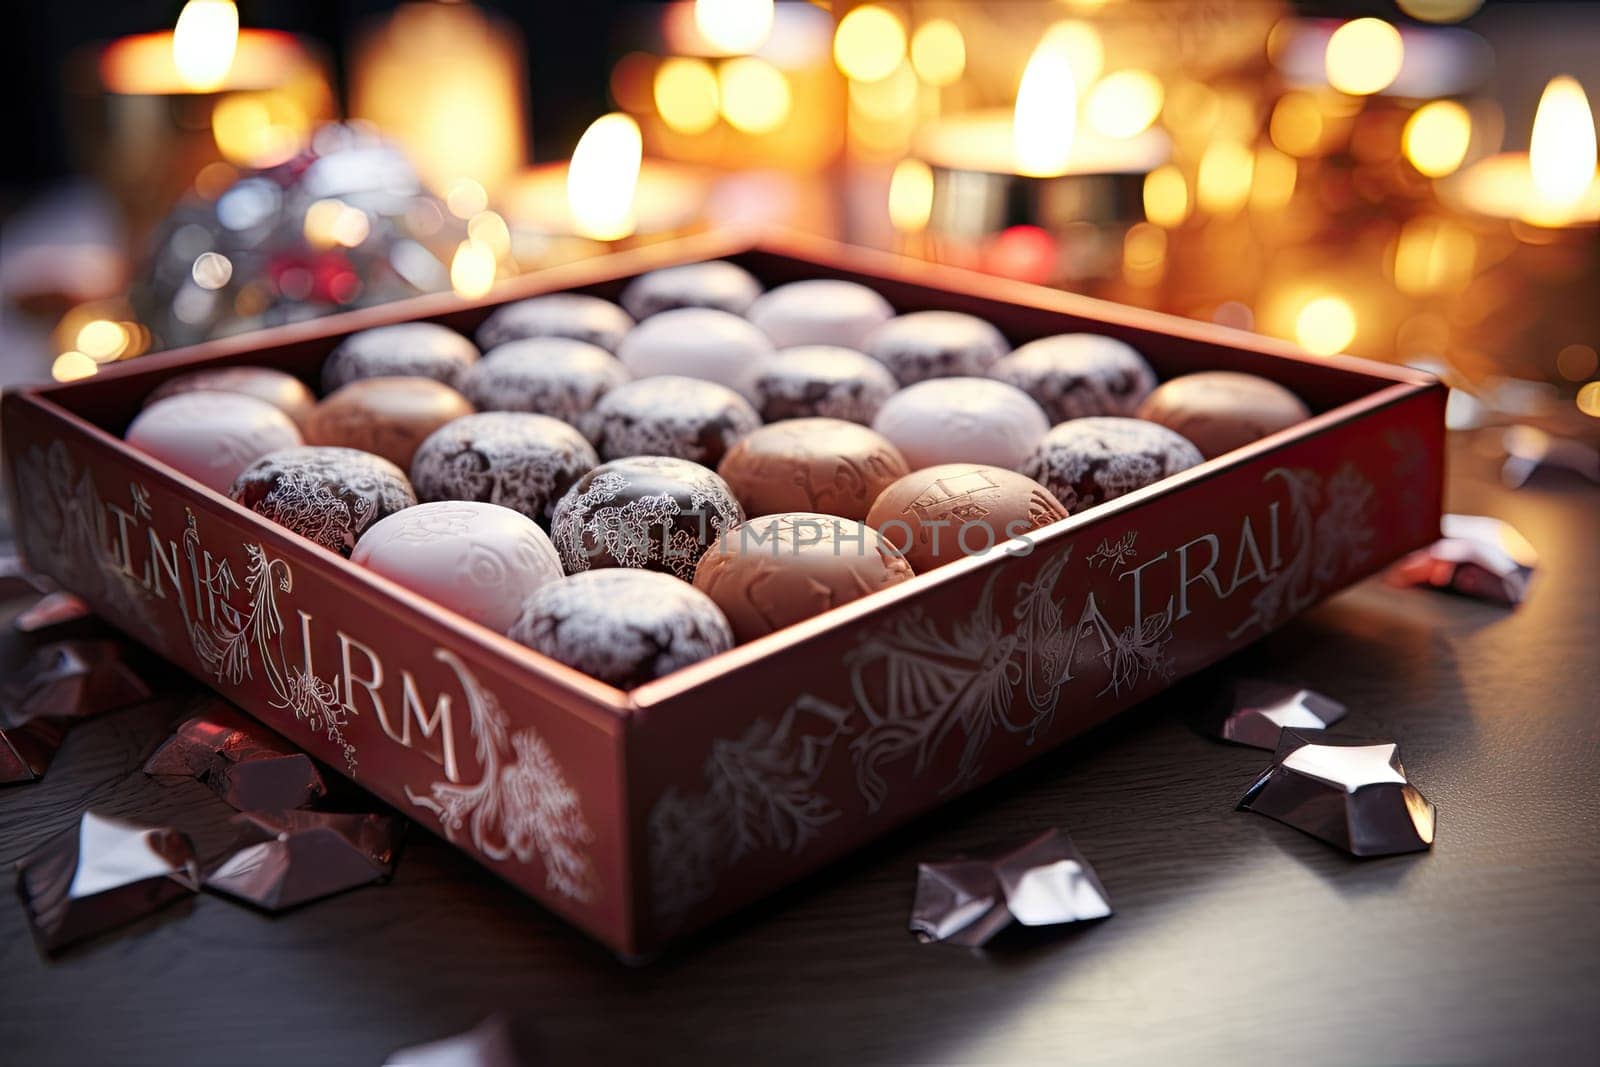 some chocolates in a box on a table with candles and lights in the background at night time, as seen from above